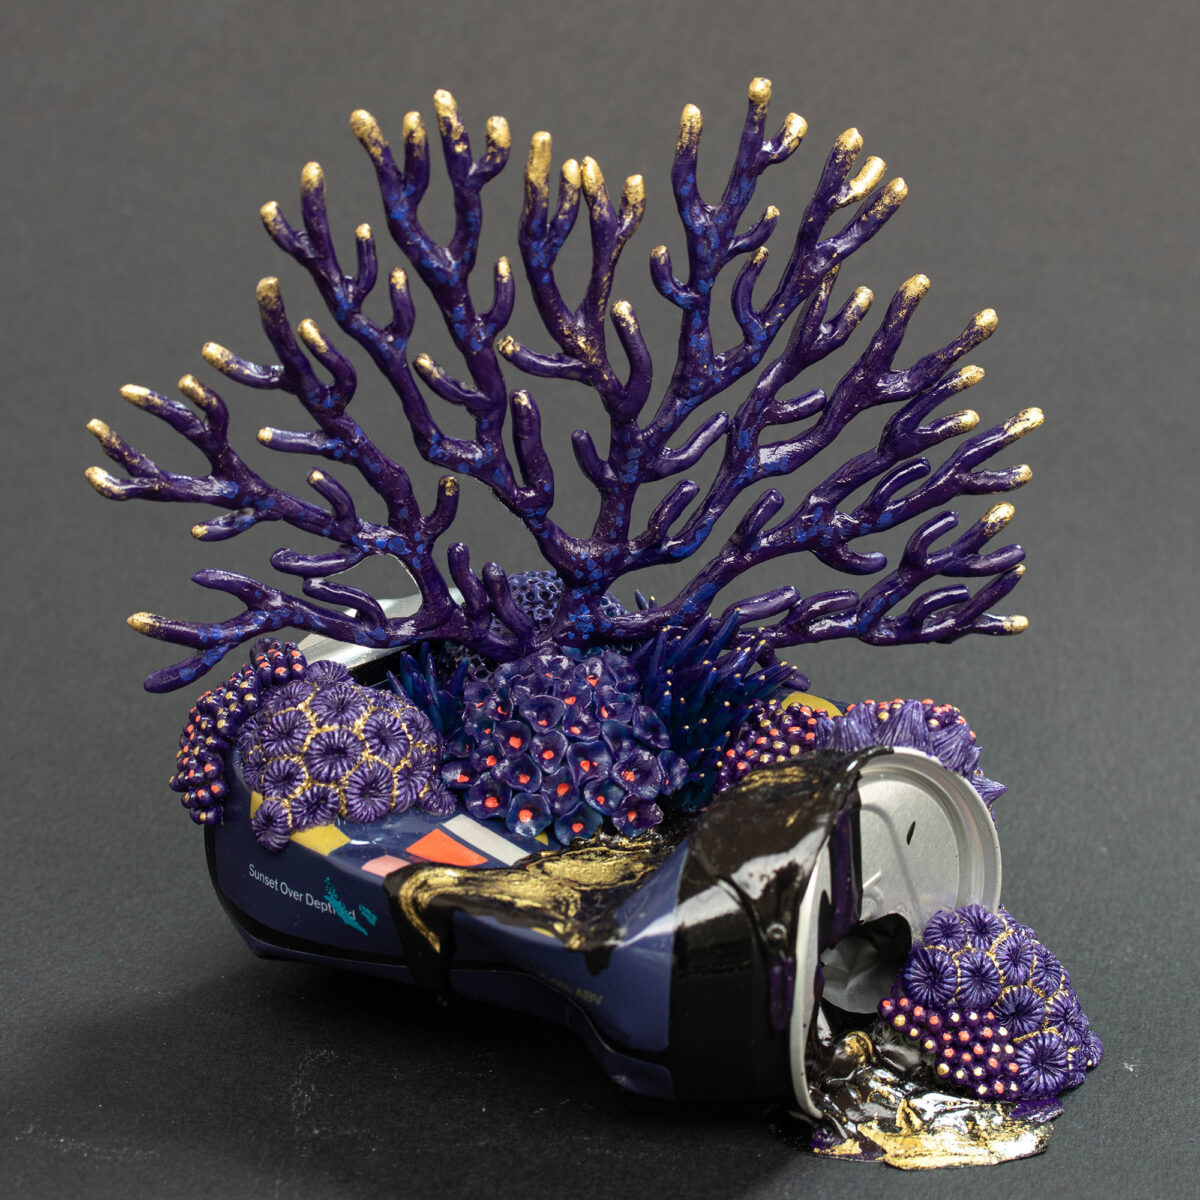 Discarded Objects Populated With Colorful Plant Coral And Fungus Sculptures By Stephanie Kilgast 3